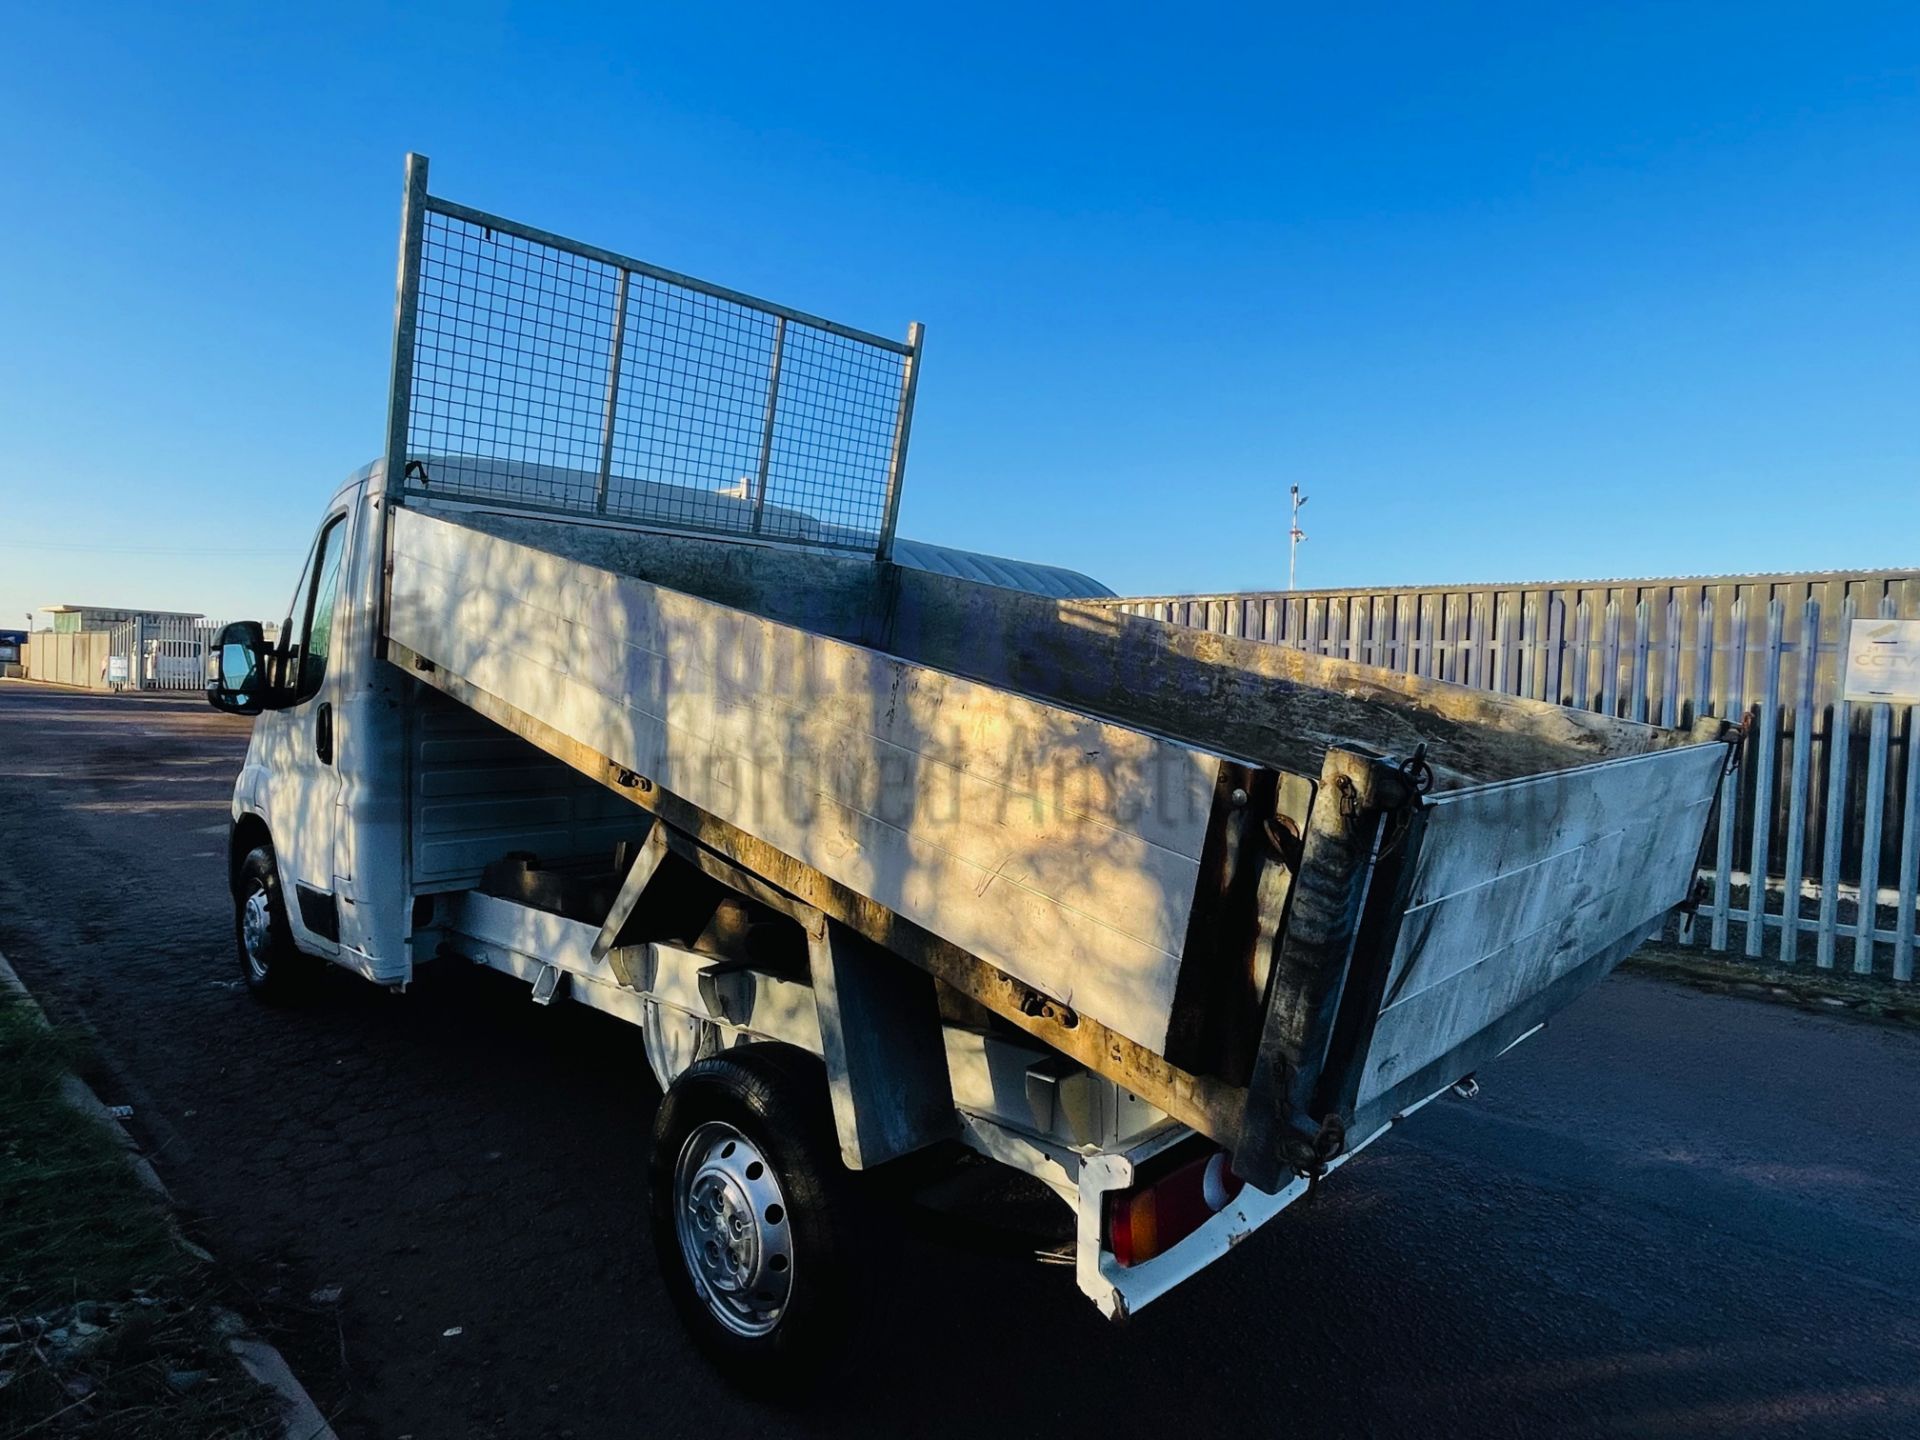 (On Sale) PEUGEOT BOXER 335 *TIPPER TRUCK* (2016) '2.2 HDI - 130 BHP - 6 SPEED' (1 OWNER) *3500 KG* - Image 10 of 38